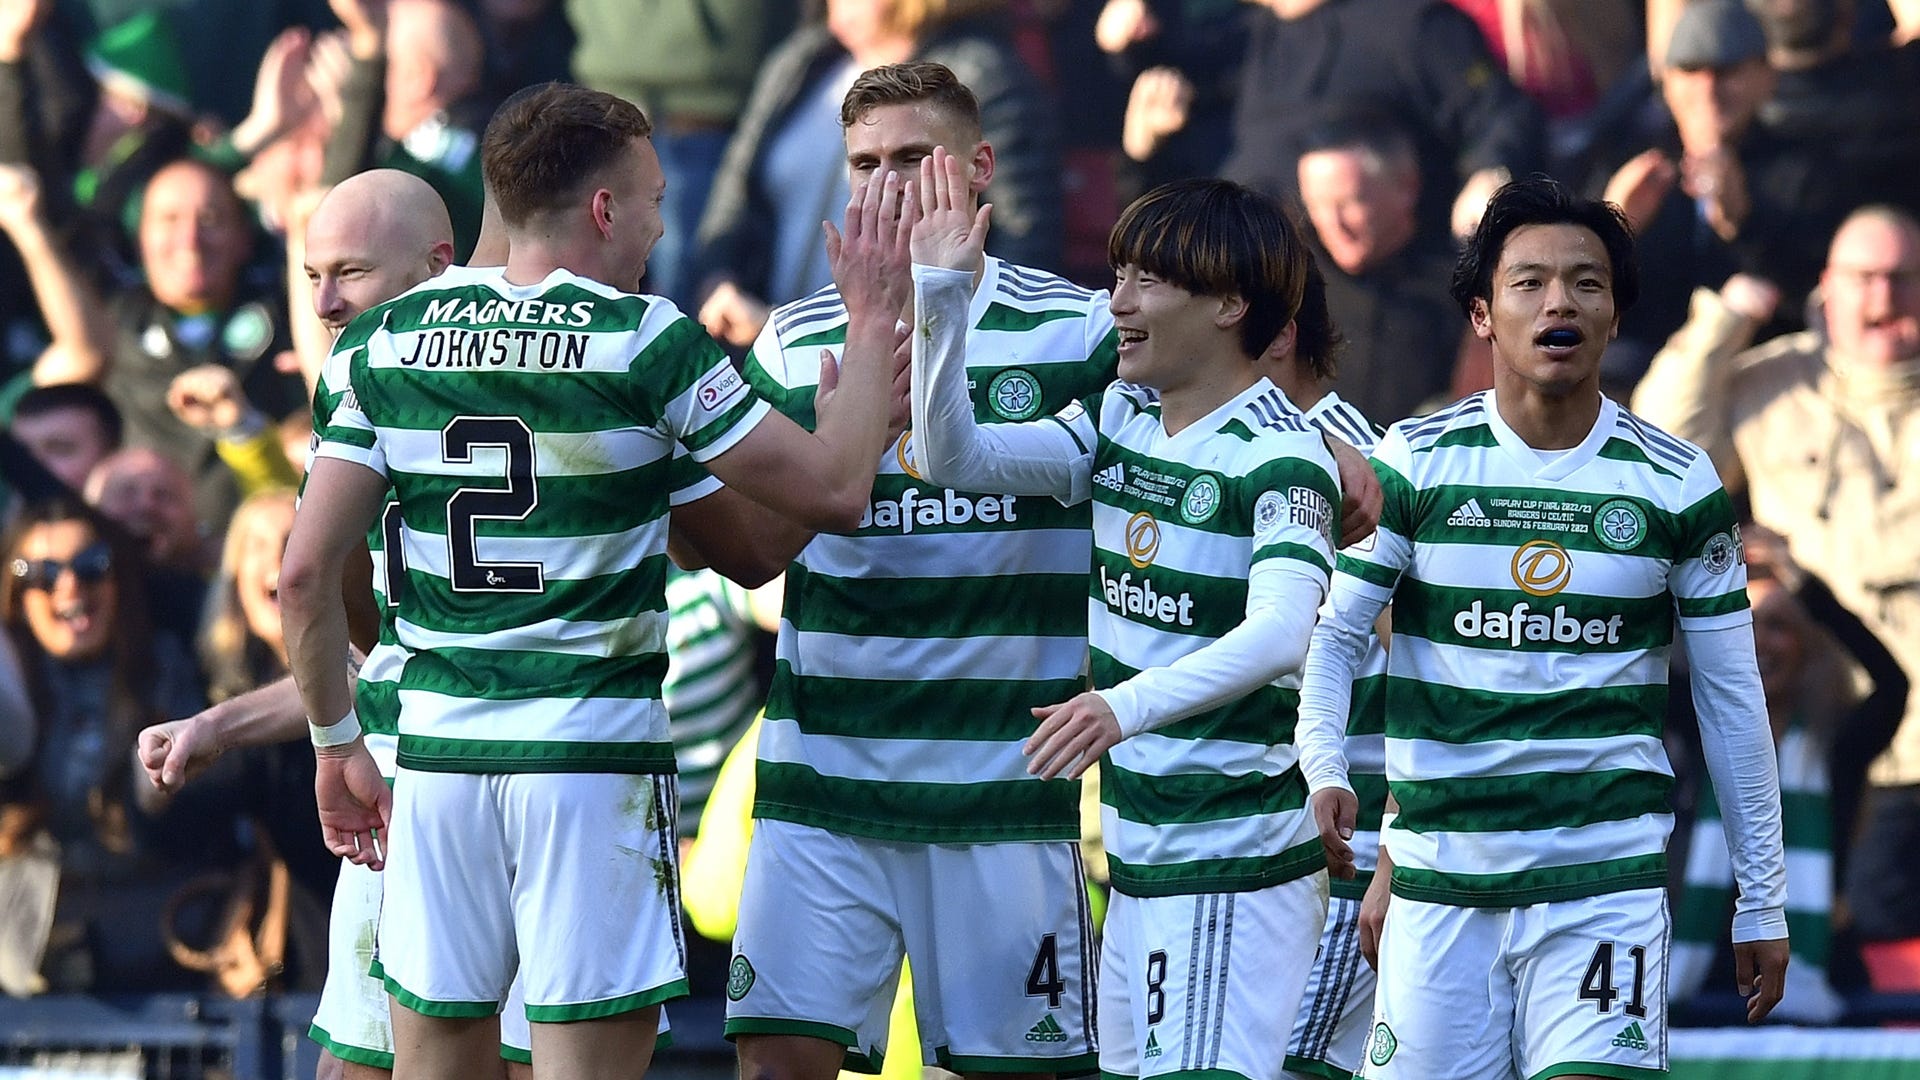 Celtic vs Hibs Live stream, TV channel, kick-off time and where to watch Goal UK